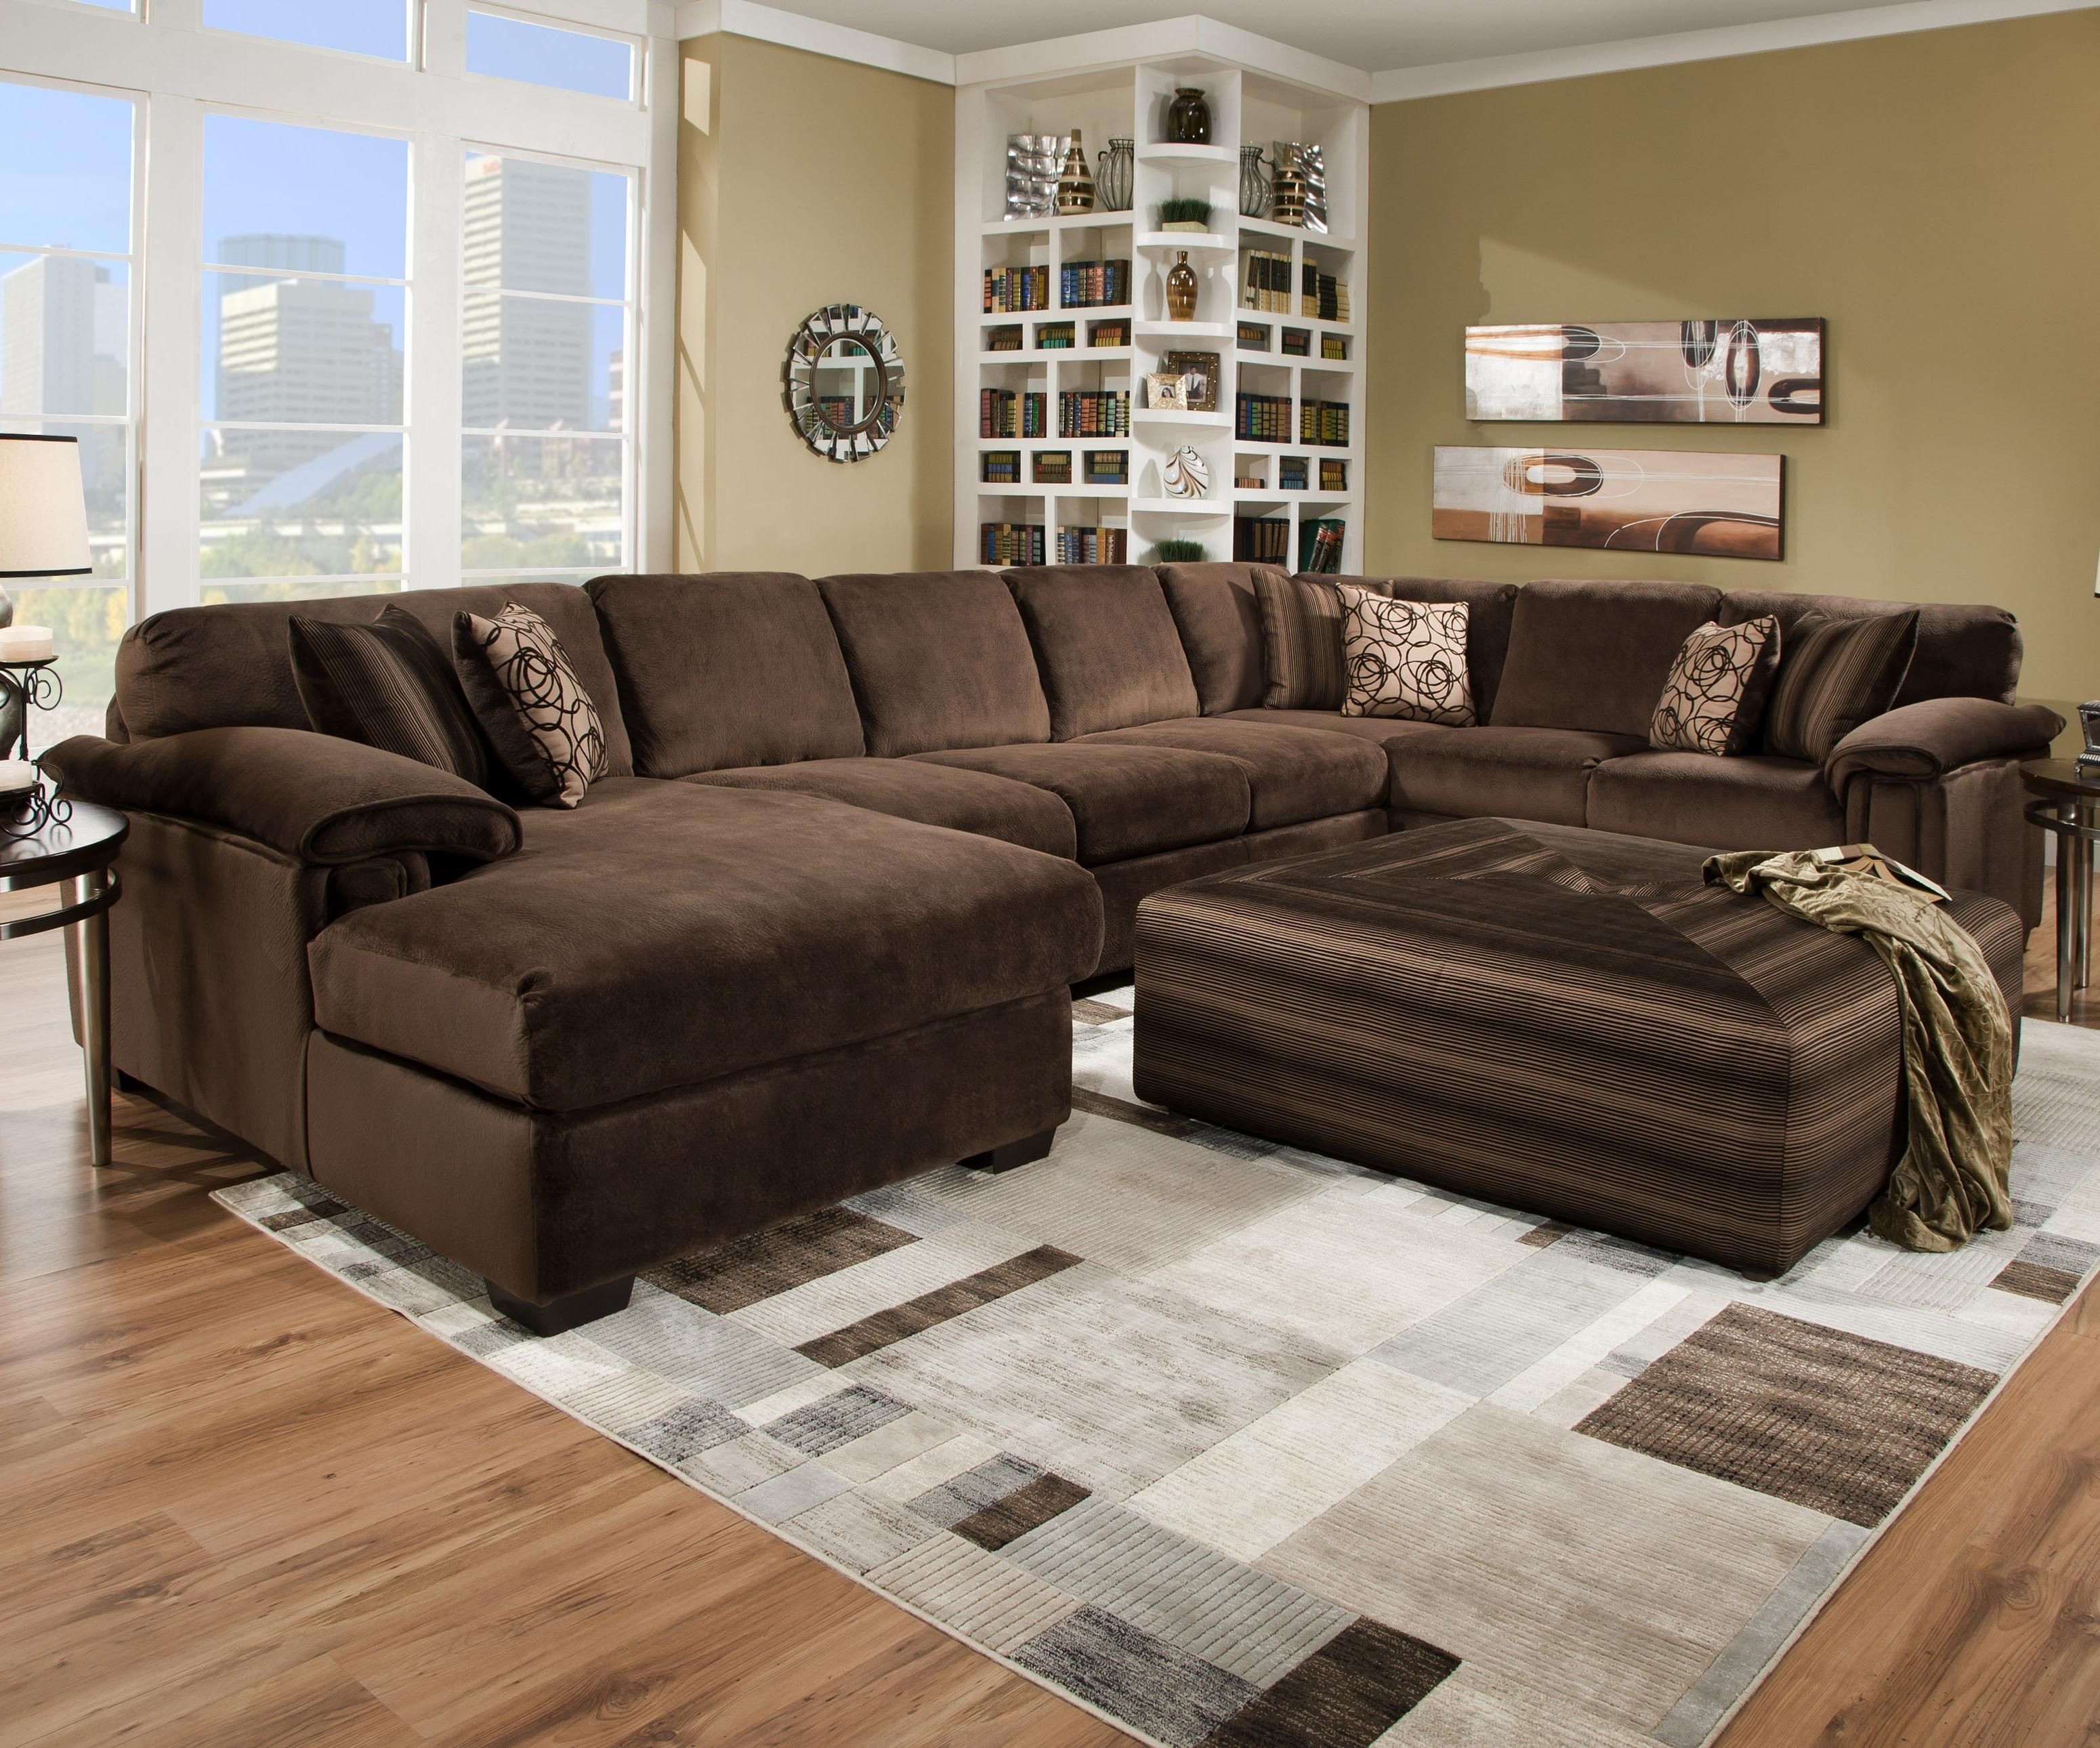 Oversized Ottoman Coffee Tables Intended For Sectional Sofas With Oversized Ottoman (Photo 6229 of 7825)